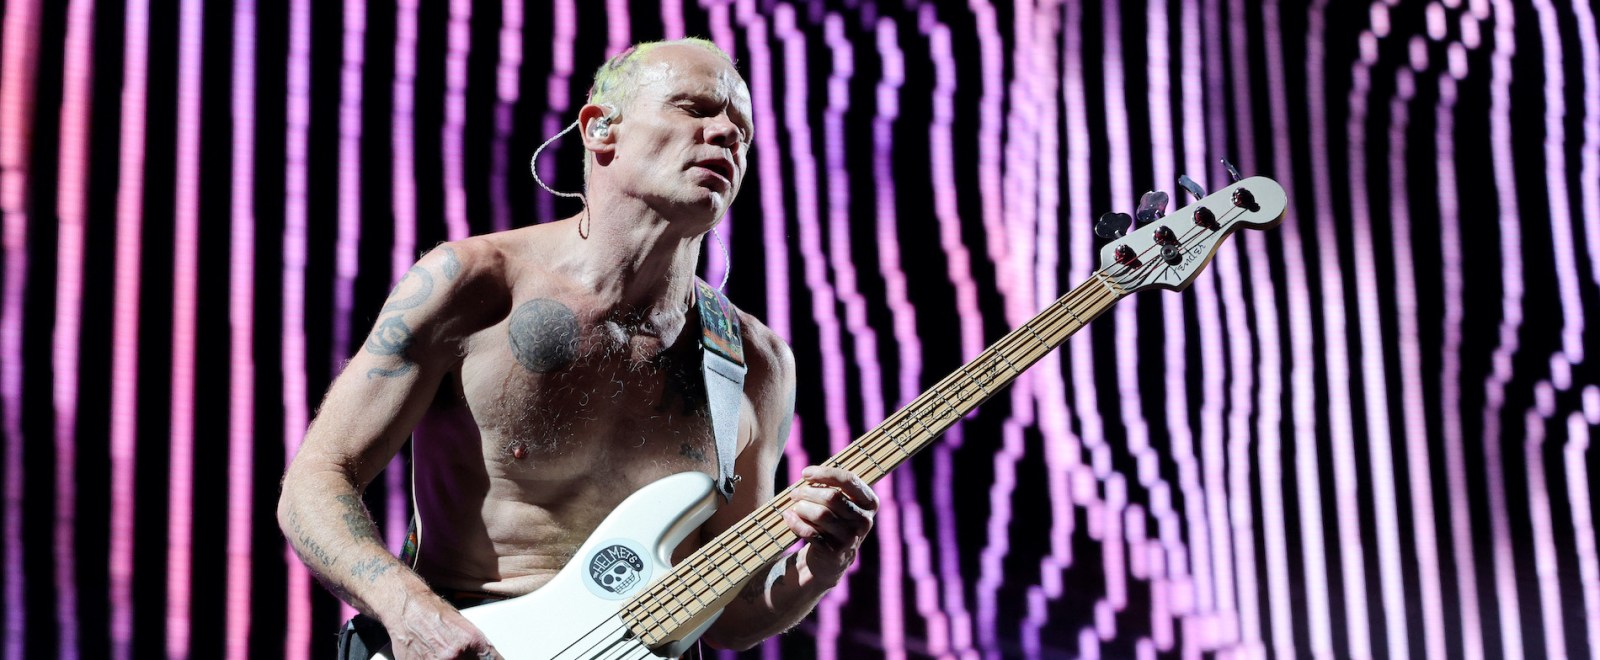 Flea Red Hot Chili Peppers 2022